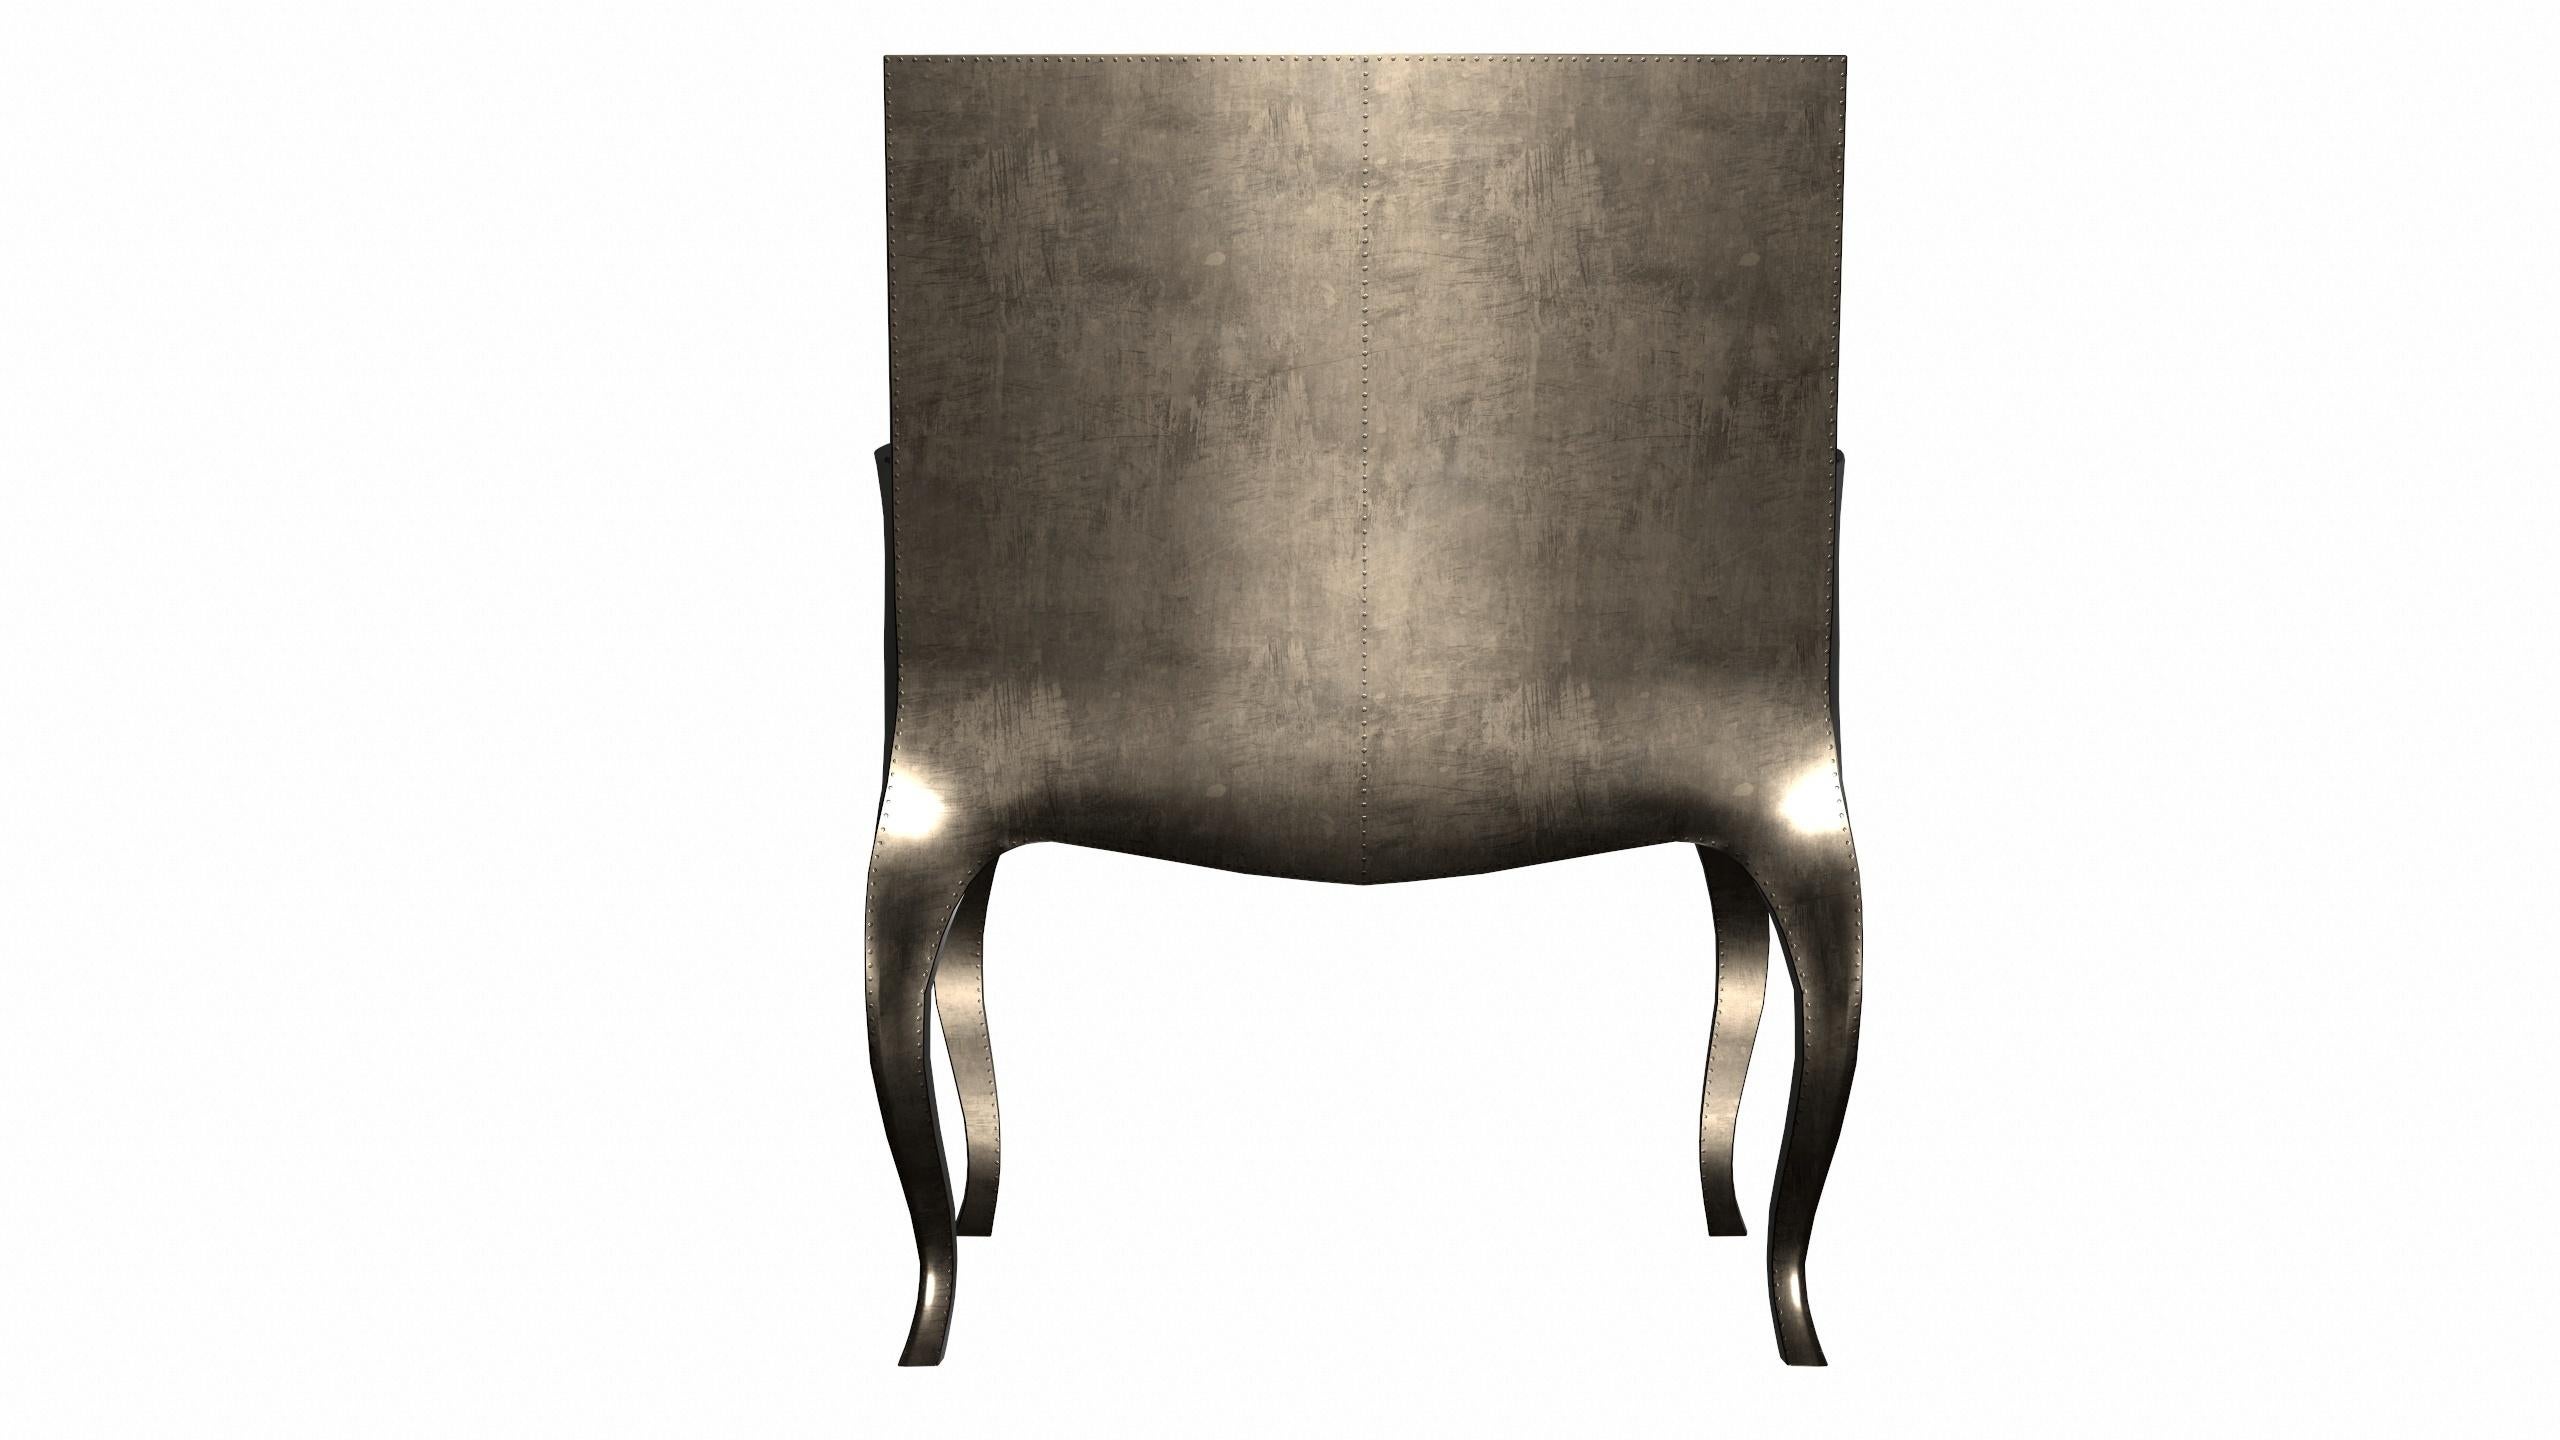 Hammered Art Deco Desk Chair in Smooth Antique Bronze by Paul Mathieu for S. Odegard For Sale